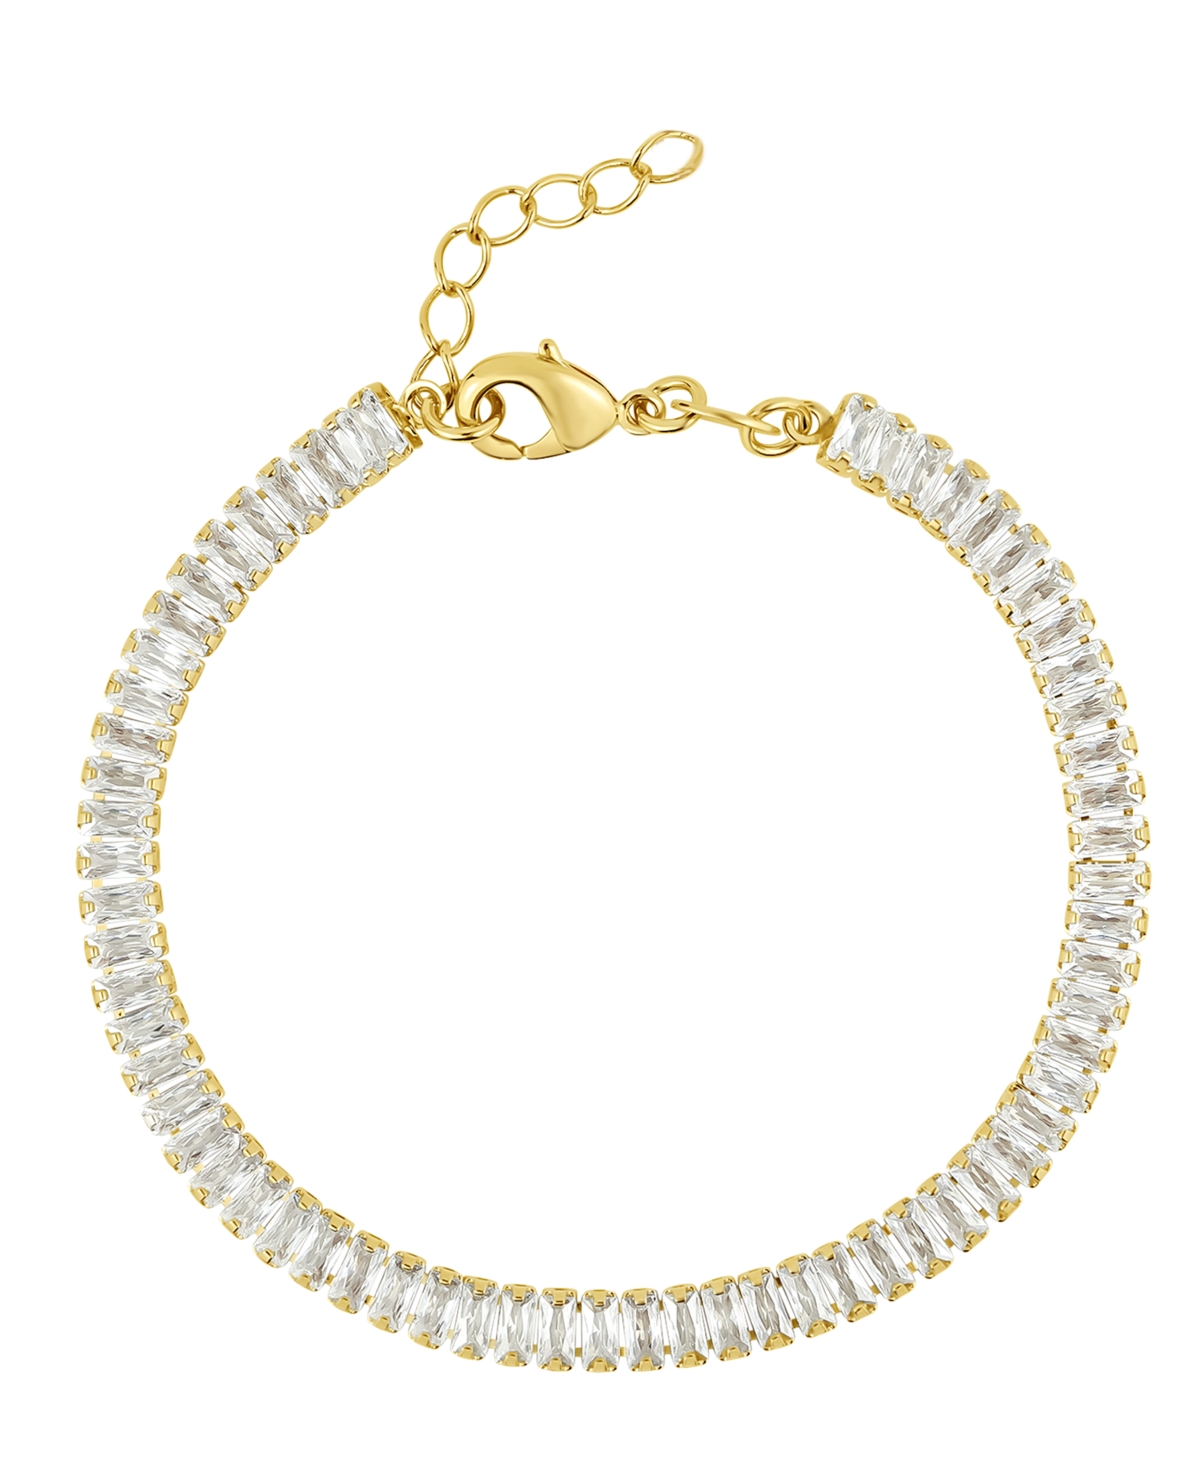 And Now This Cubic Zirconia 18k Gold Plated Baguette Bracelet In K Gold Plated Over Brass